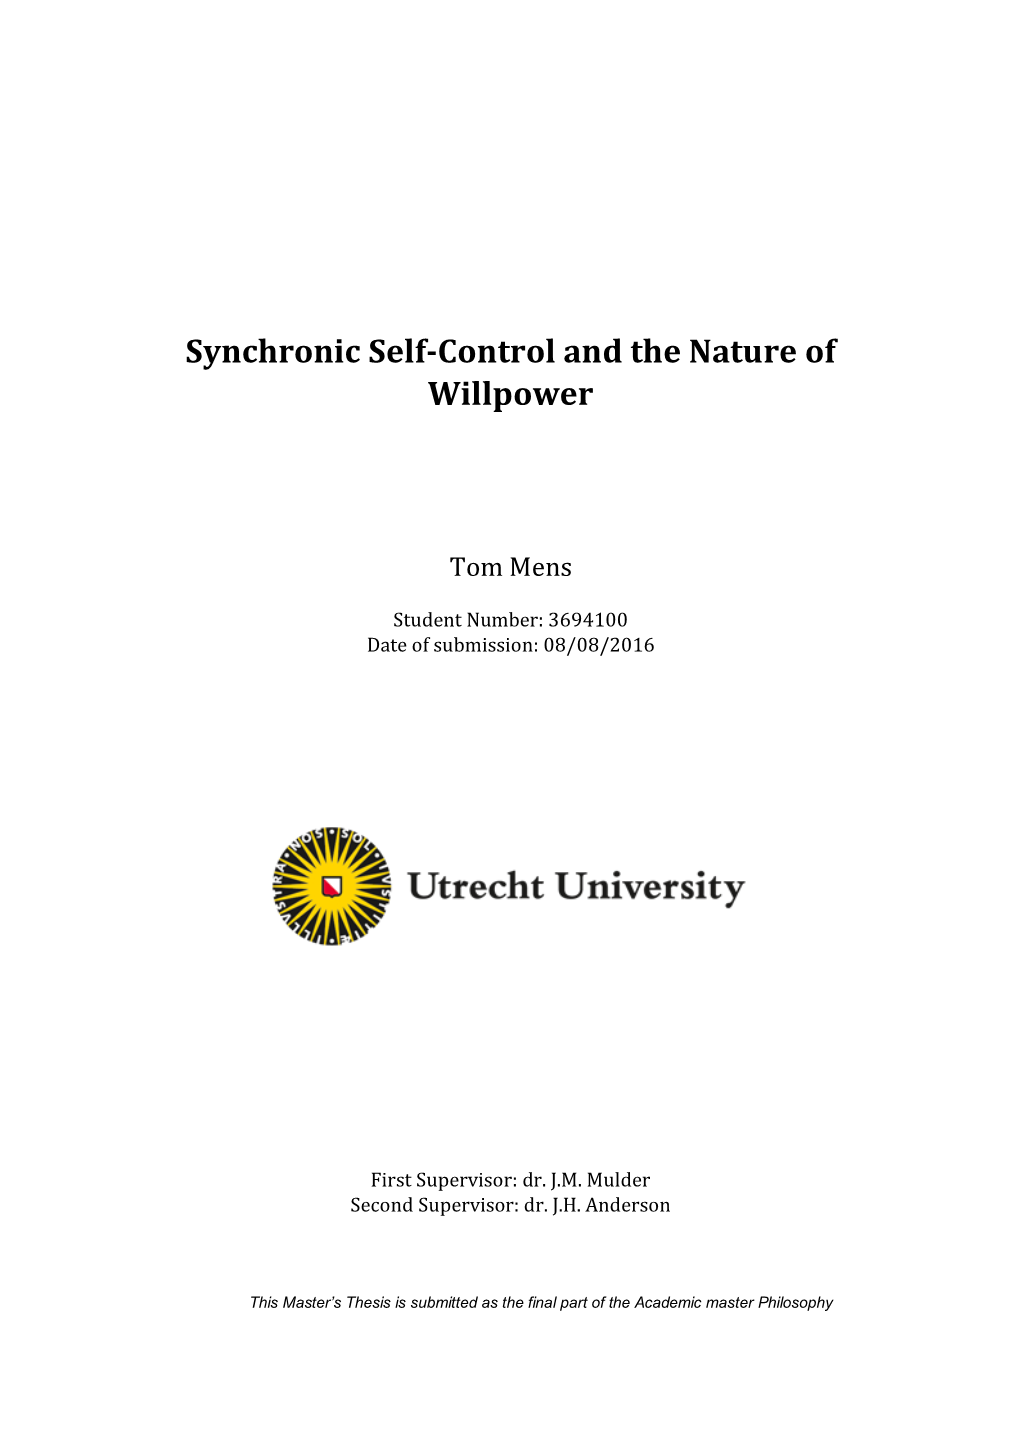 Synchronic Self-Control and the Nature of Willpower